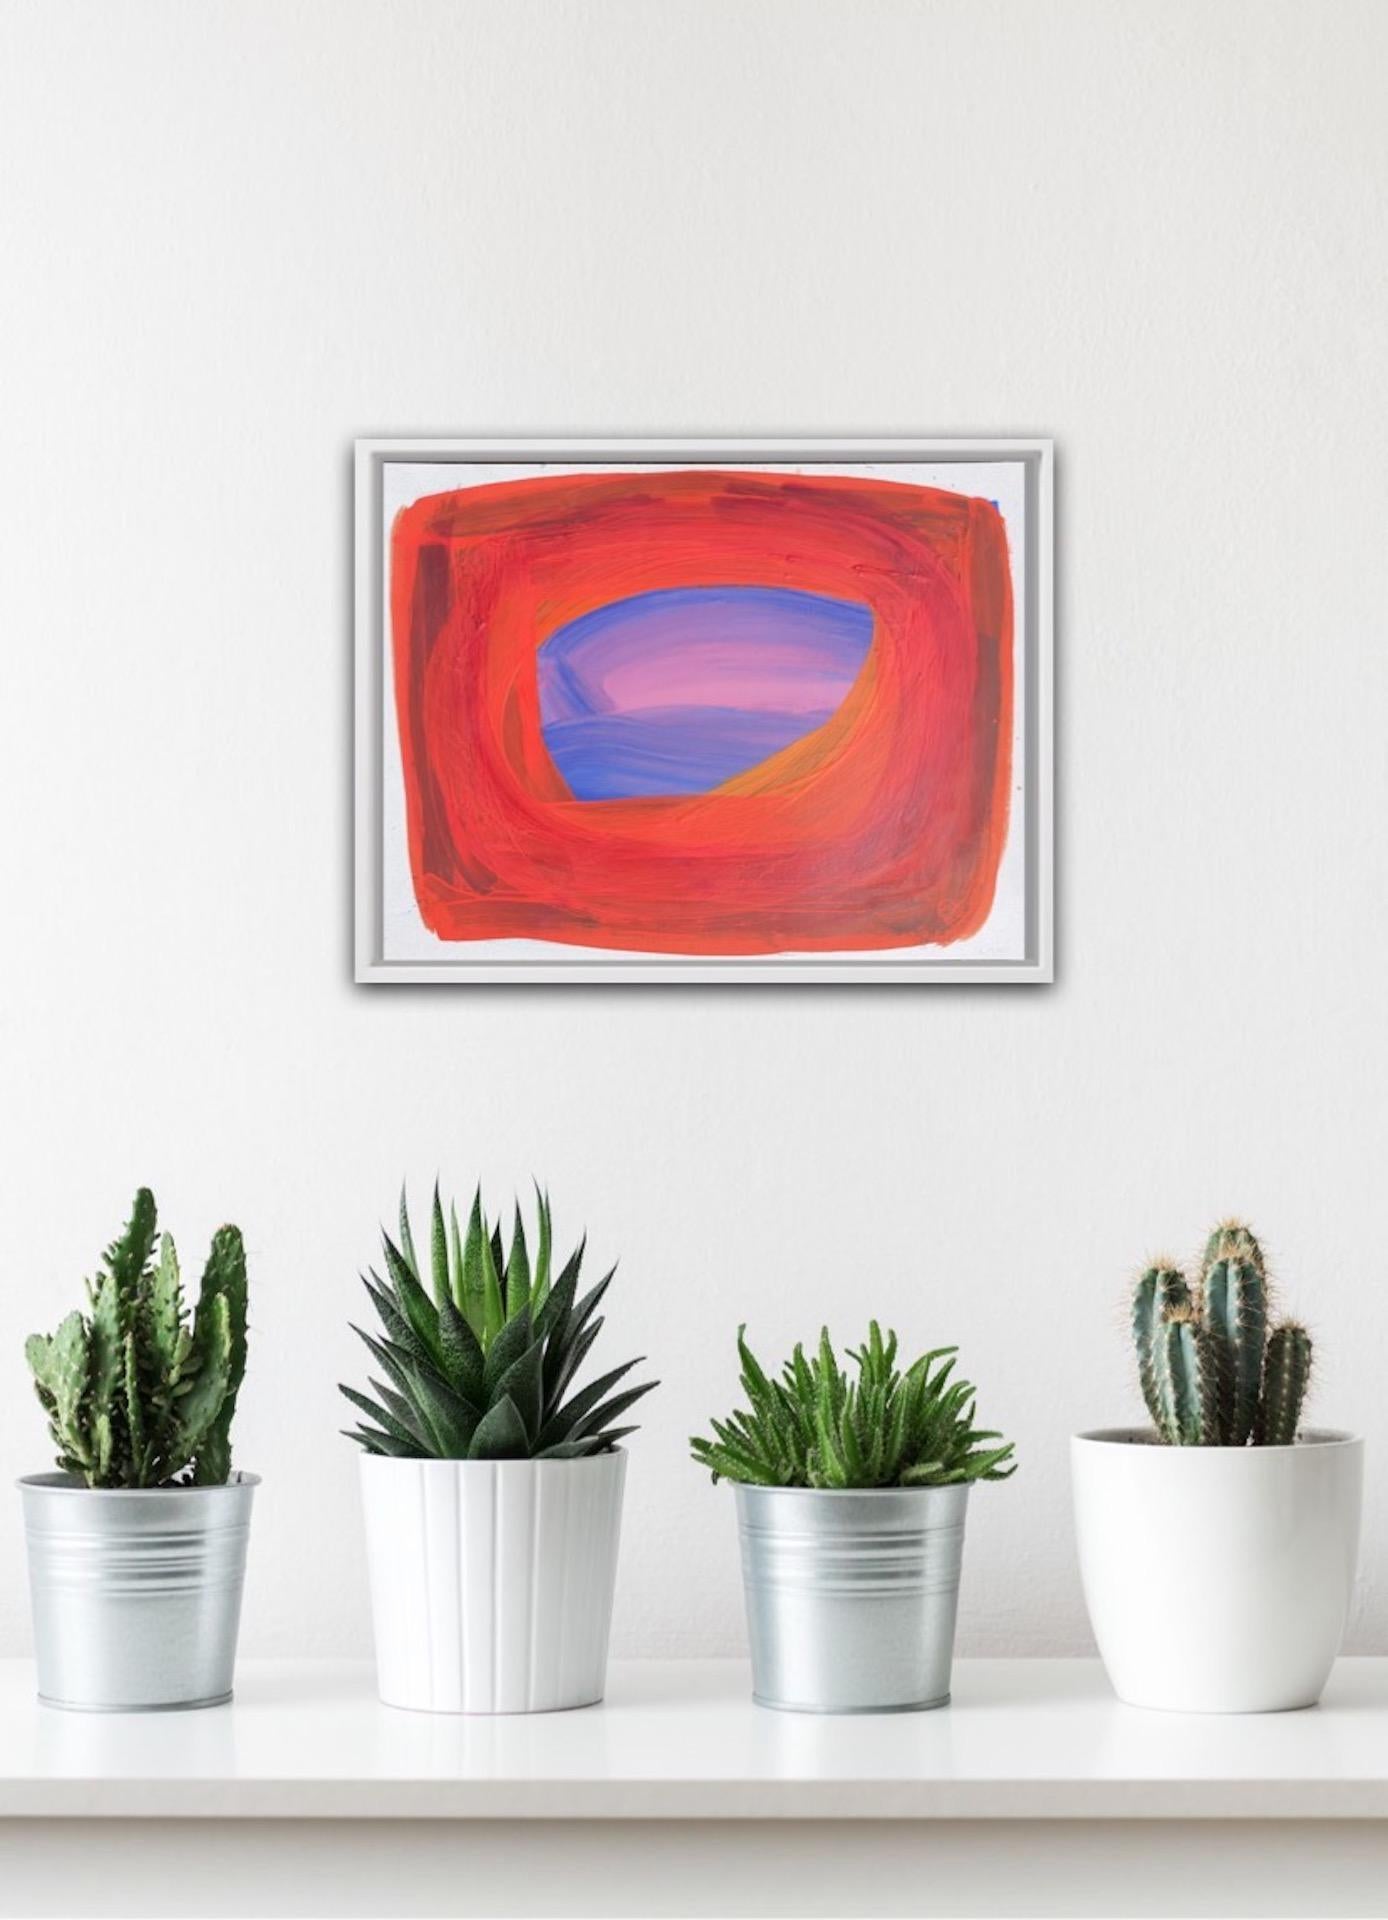 Julia Craig
Fuego II
Original Abstract Art
Oil on paper
Size: H 26cm x W 34.5cm
Sold Unframed
(Please note that in situ images are purely an indication of how a piece may look).

Julia is an abstract artist whose love of colour is clearly apparent